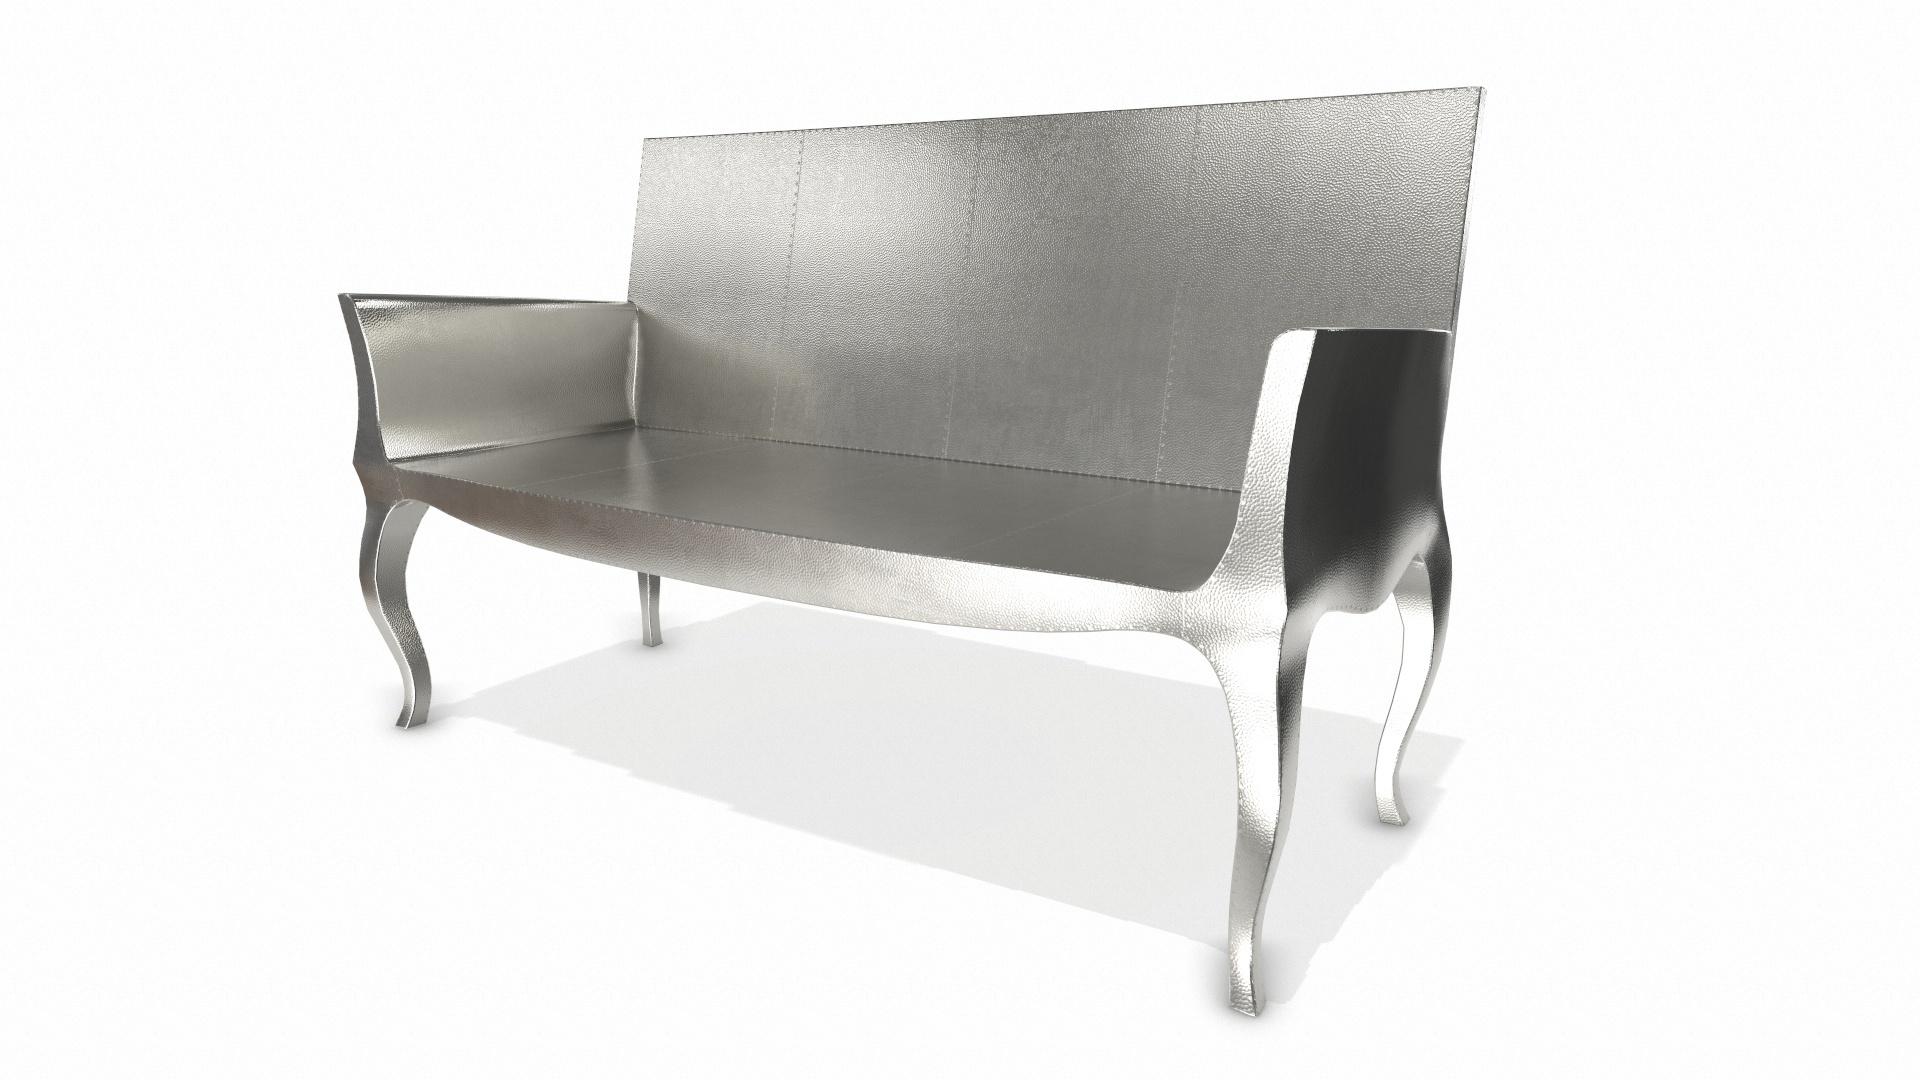 American Louise Settee Art Deco Daybeds in Mid. Hammered White Bronze by Paul Mathieu For Sale